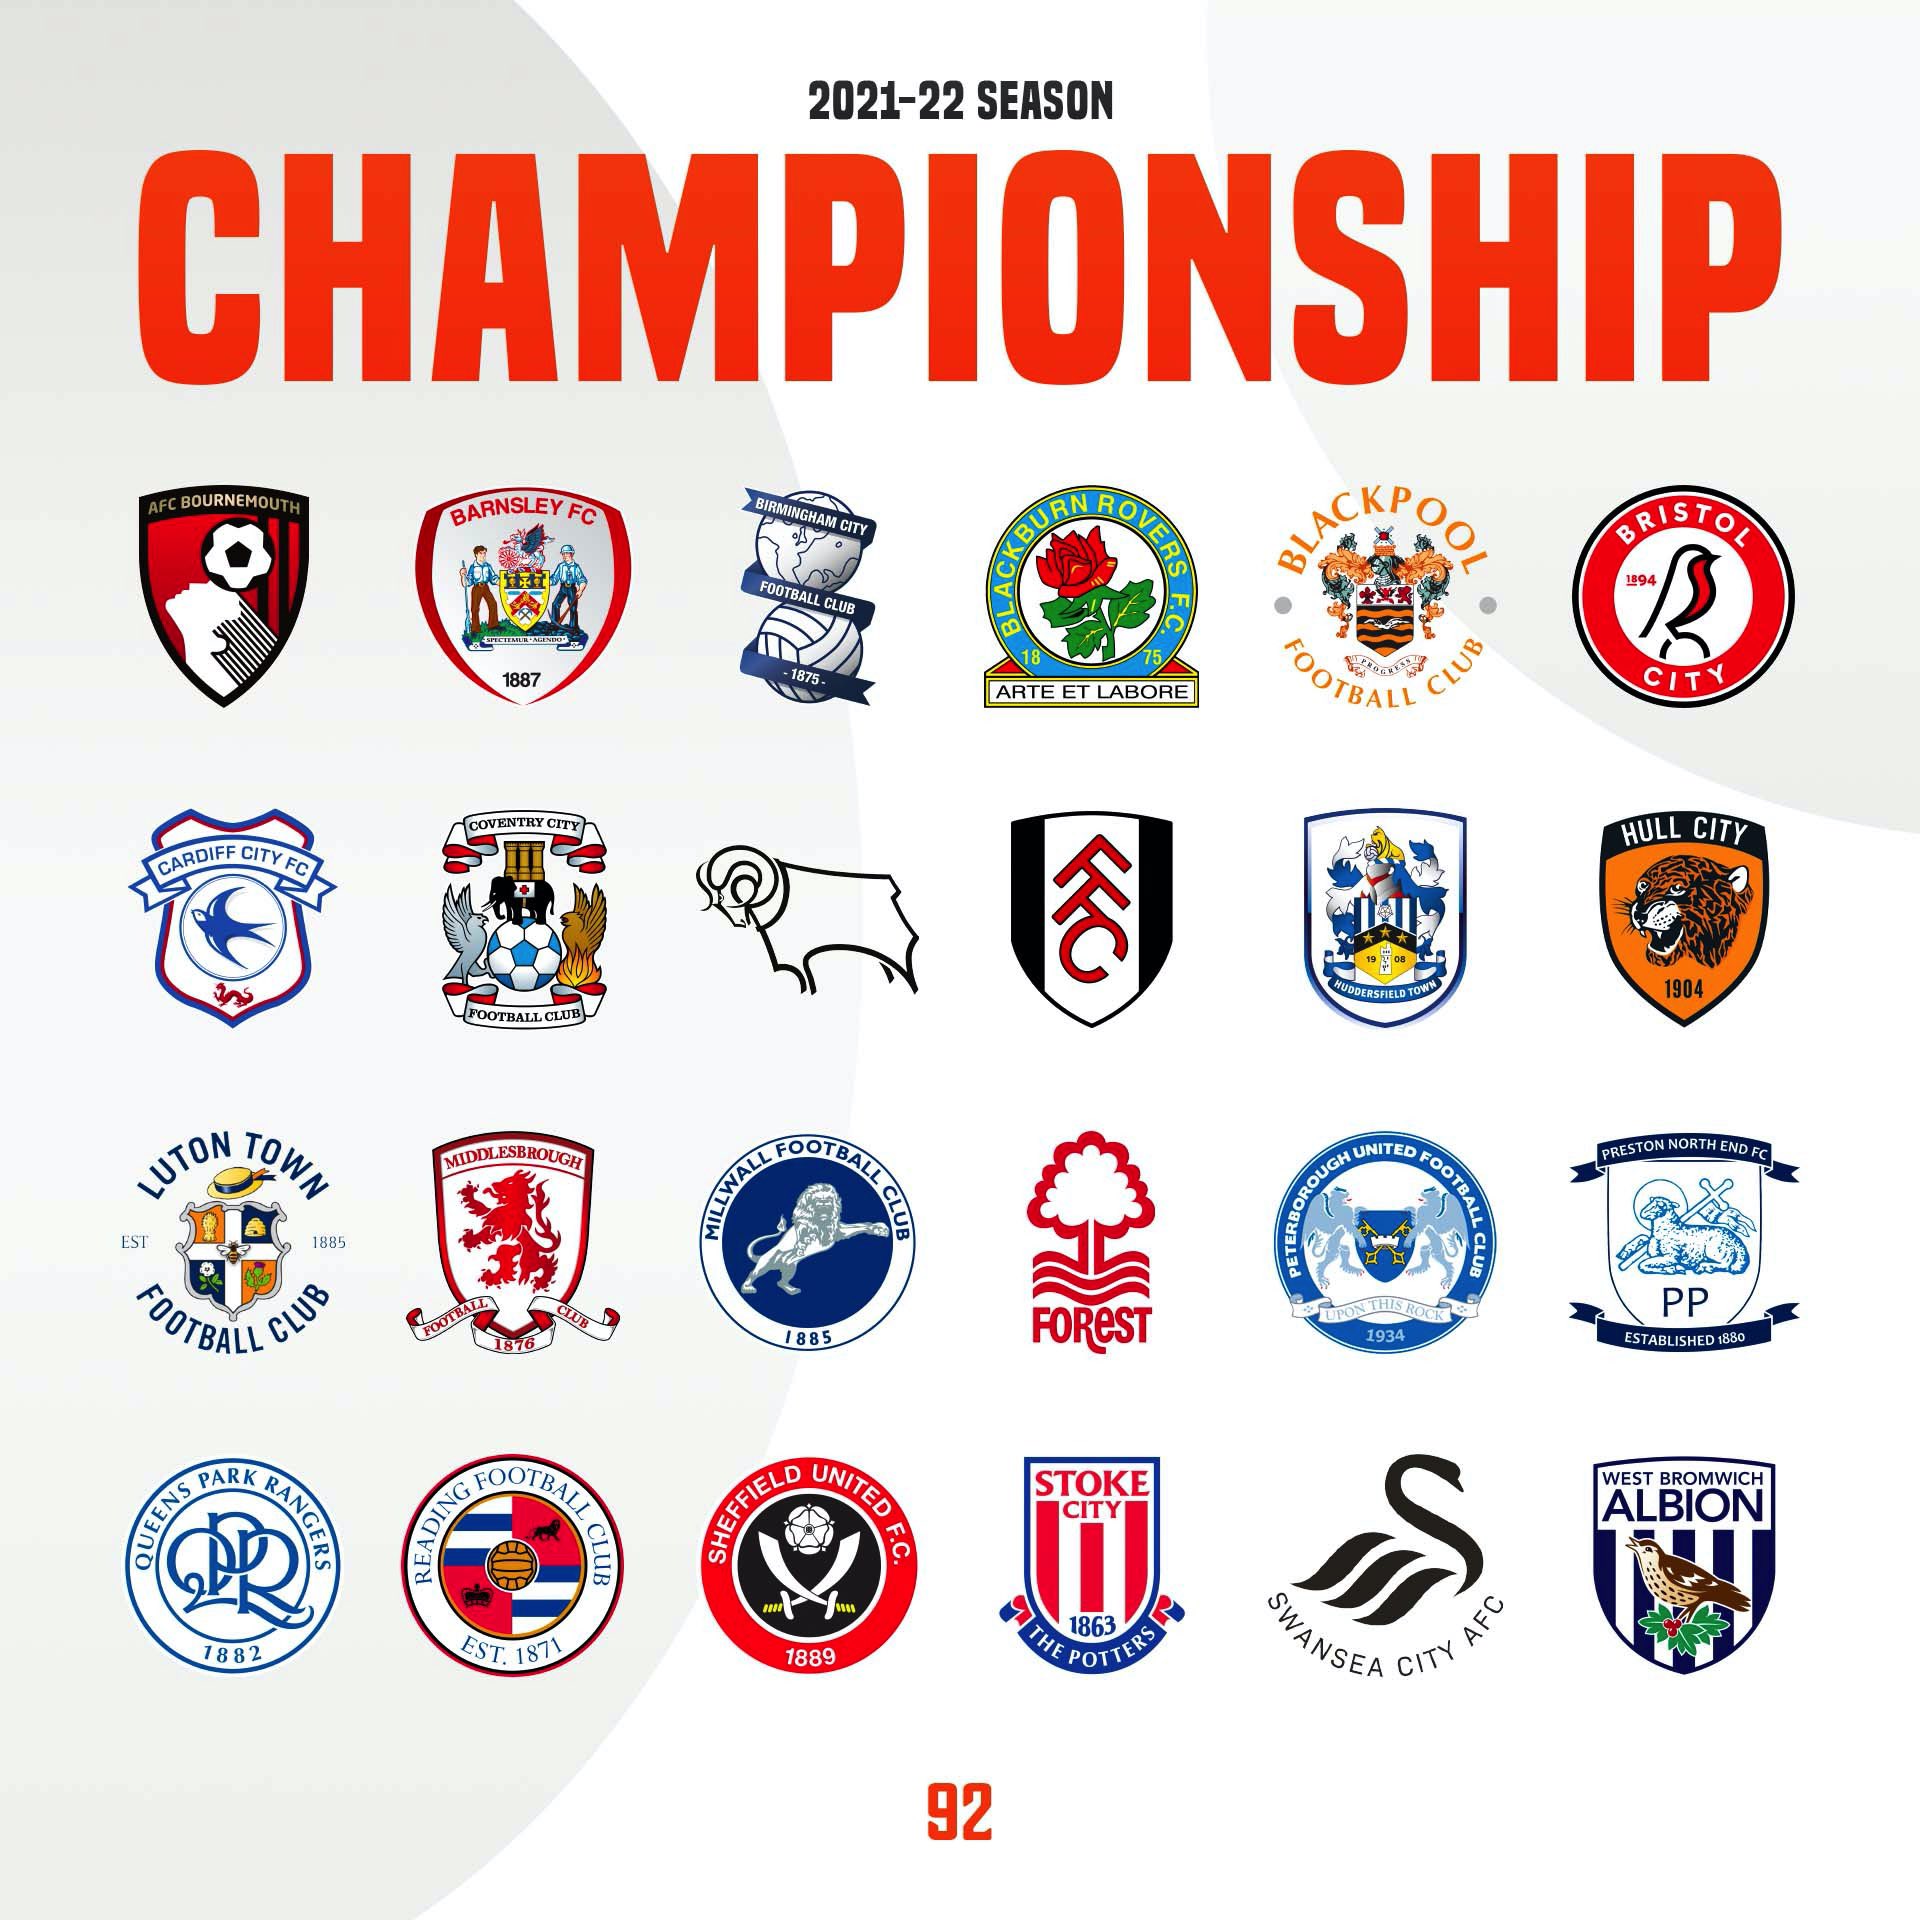 EFL Championship Clubs by Badges